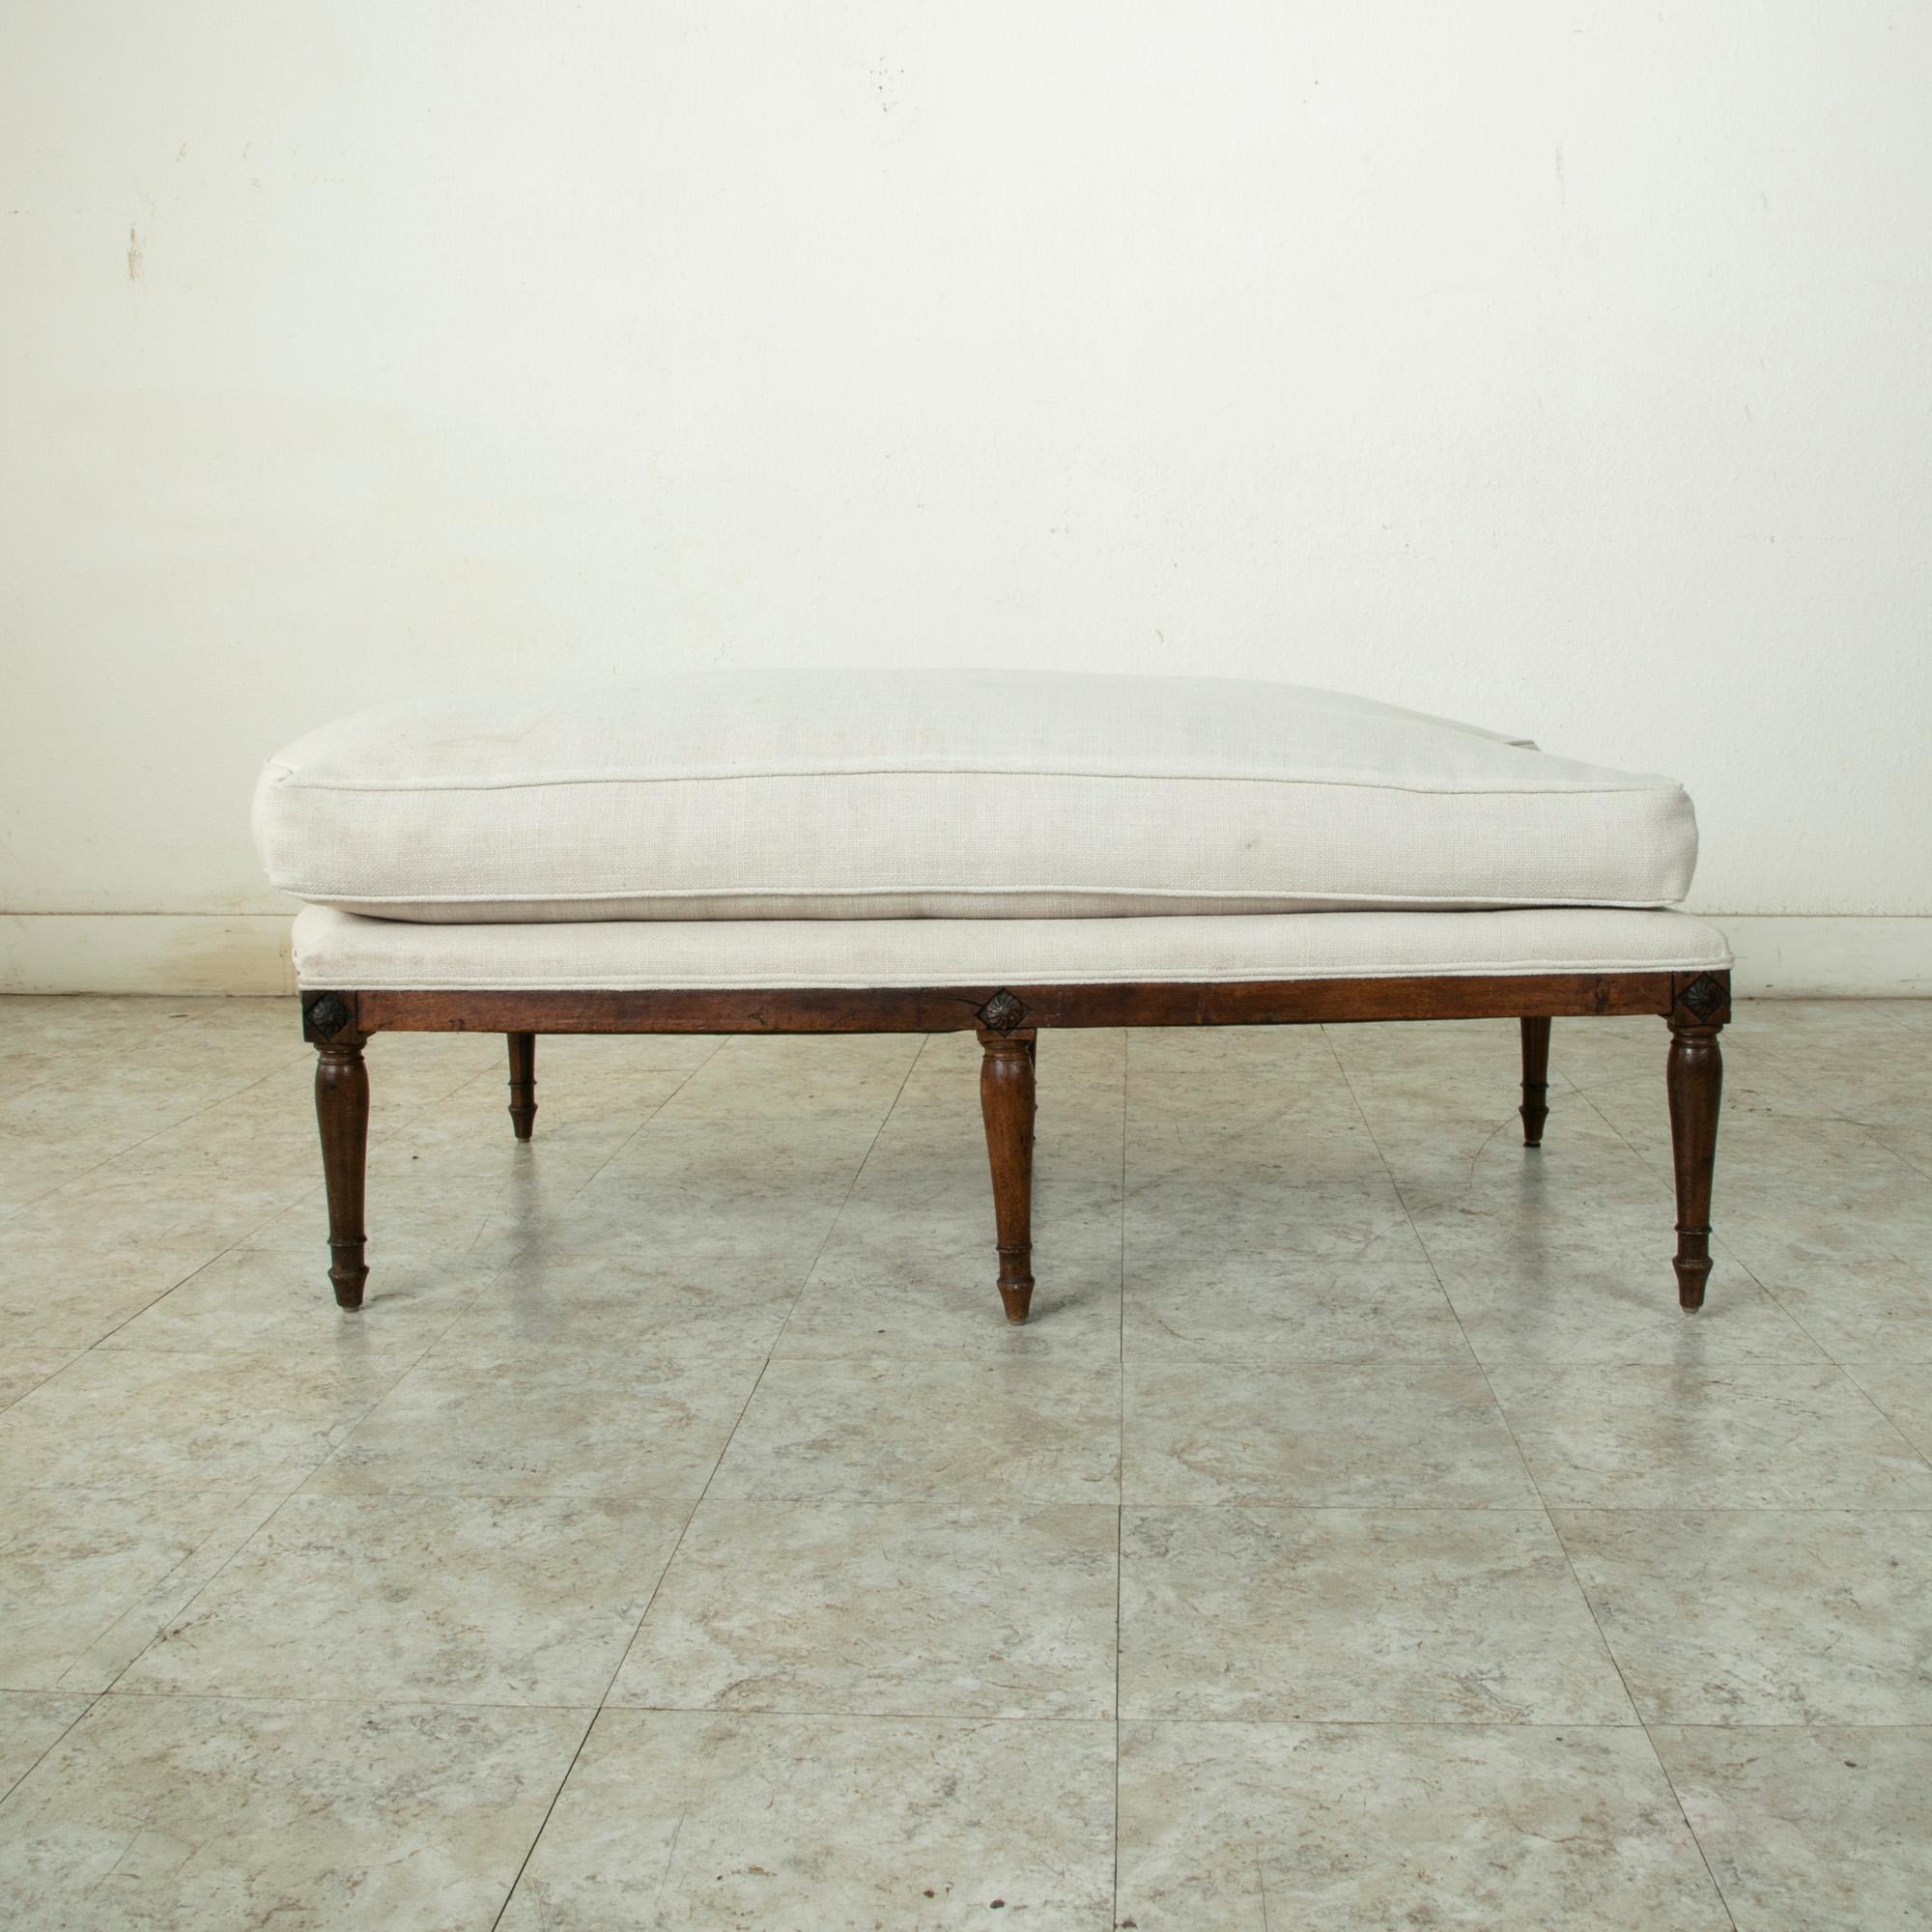 Late 18th Century French Directoire Period Hand Carved Walnut Chaise Longue For Sale 10